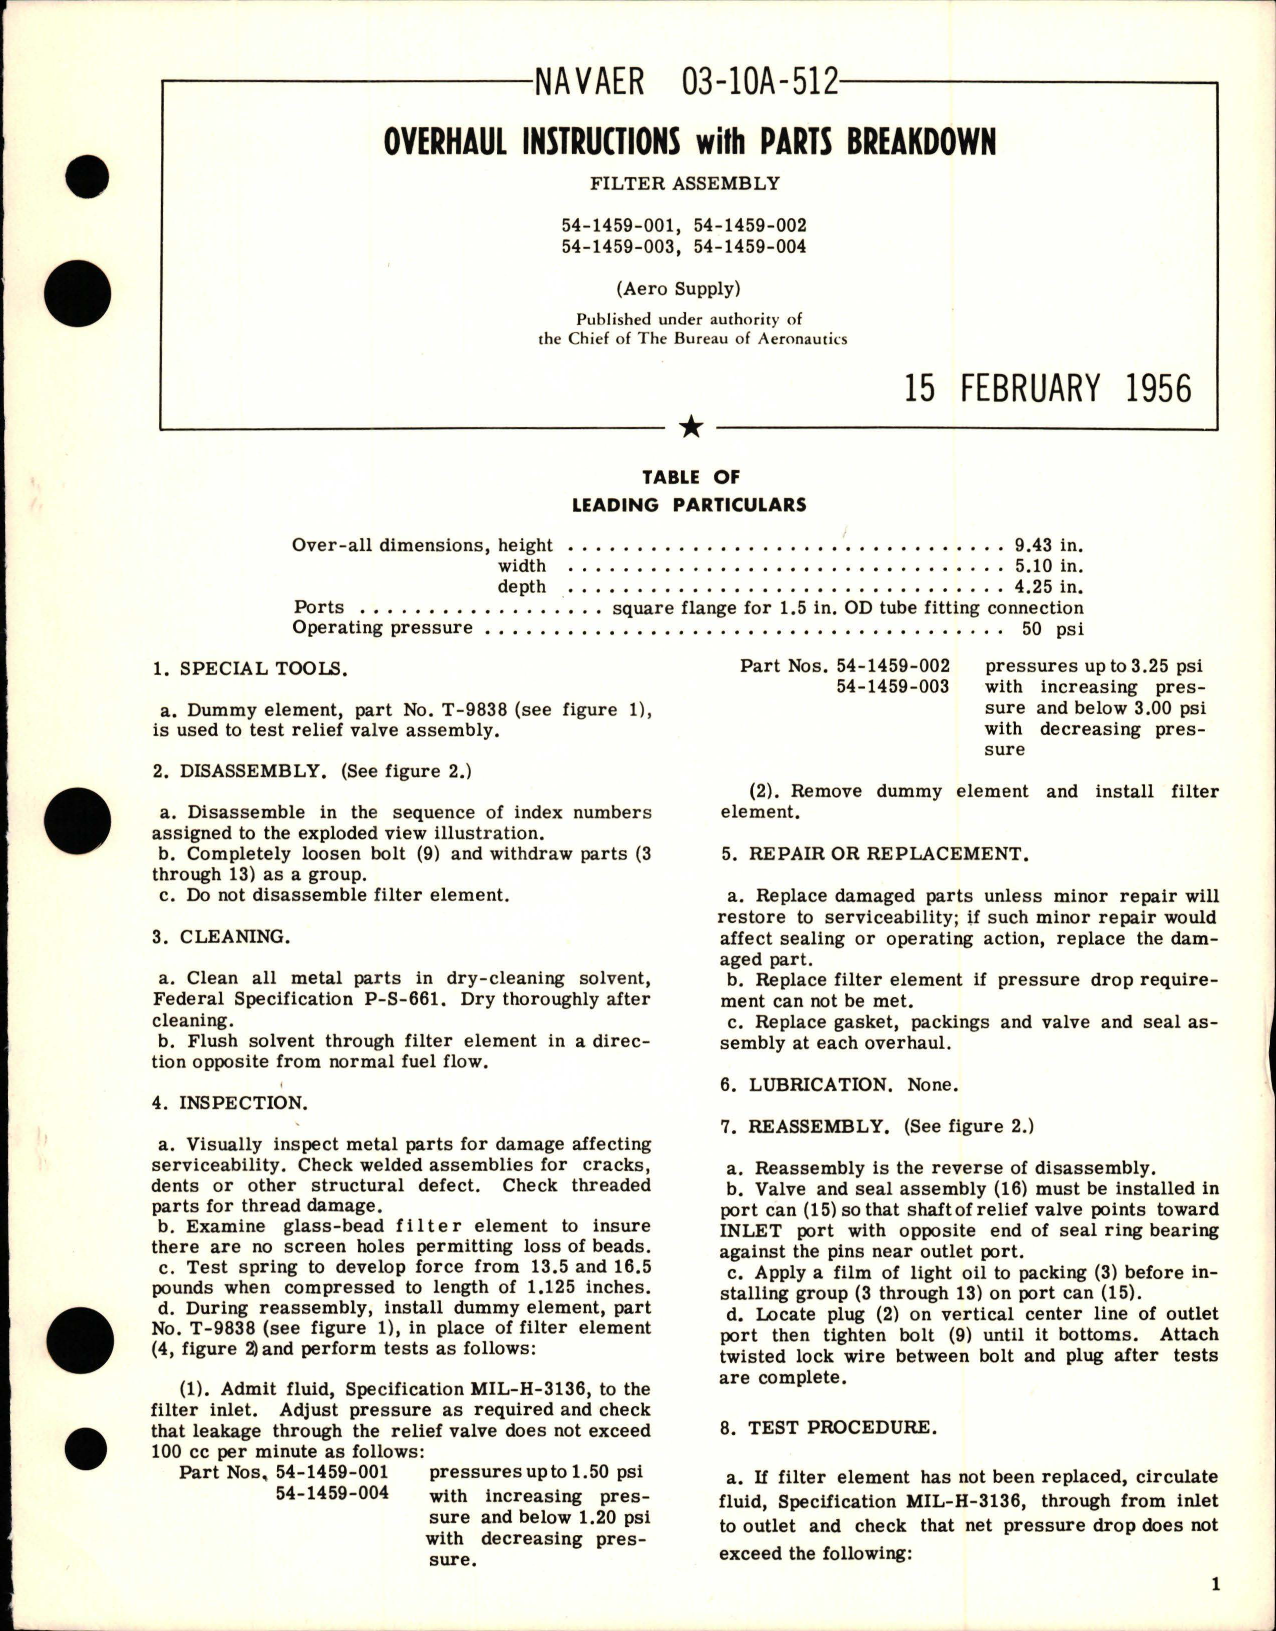 Sample page 1 from AirCorps Library document: Overhaul Instructions with Parts Breakdown for Filter Assembly - 54-1459-001, 54-1459-002, 54-1459-003, and 54-1459-004 